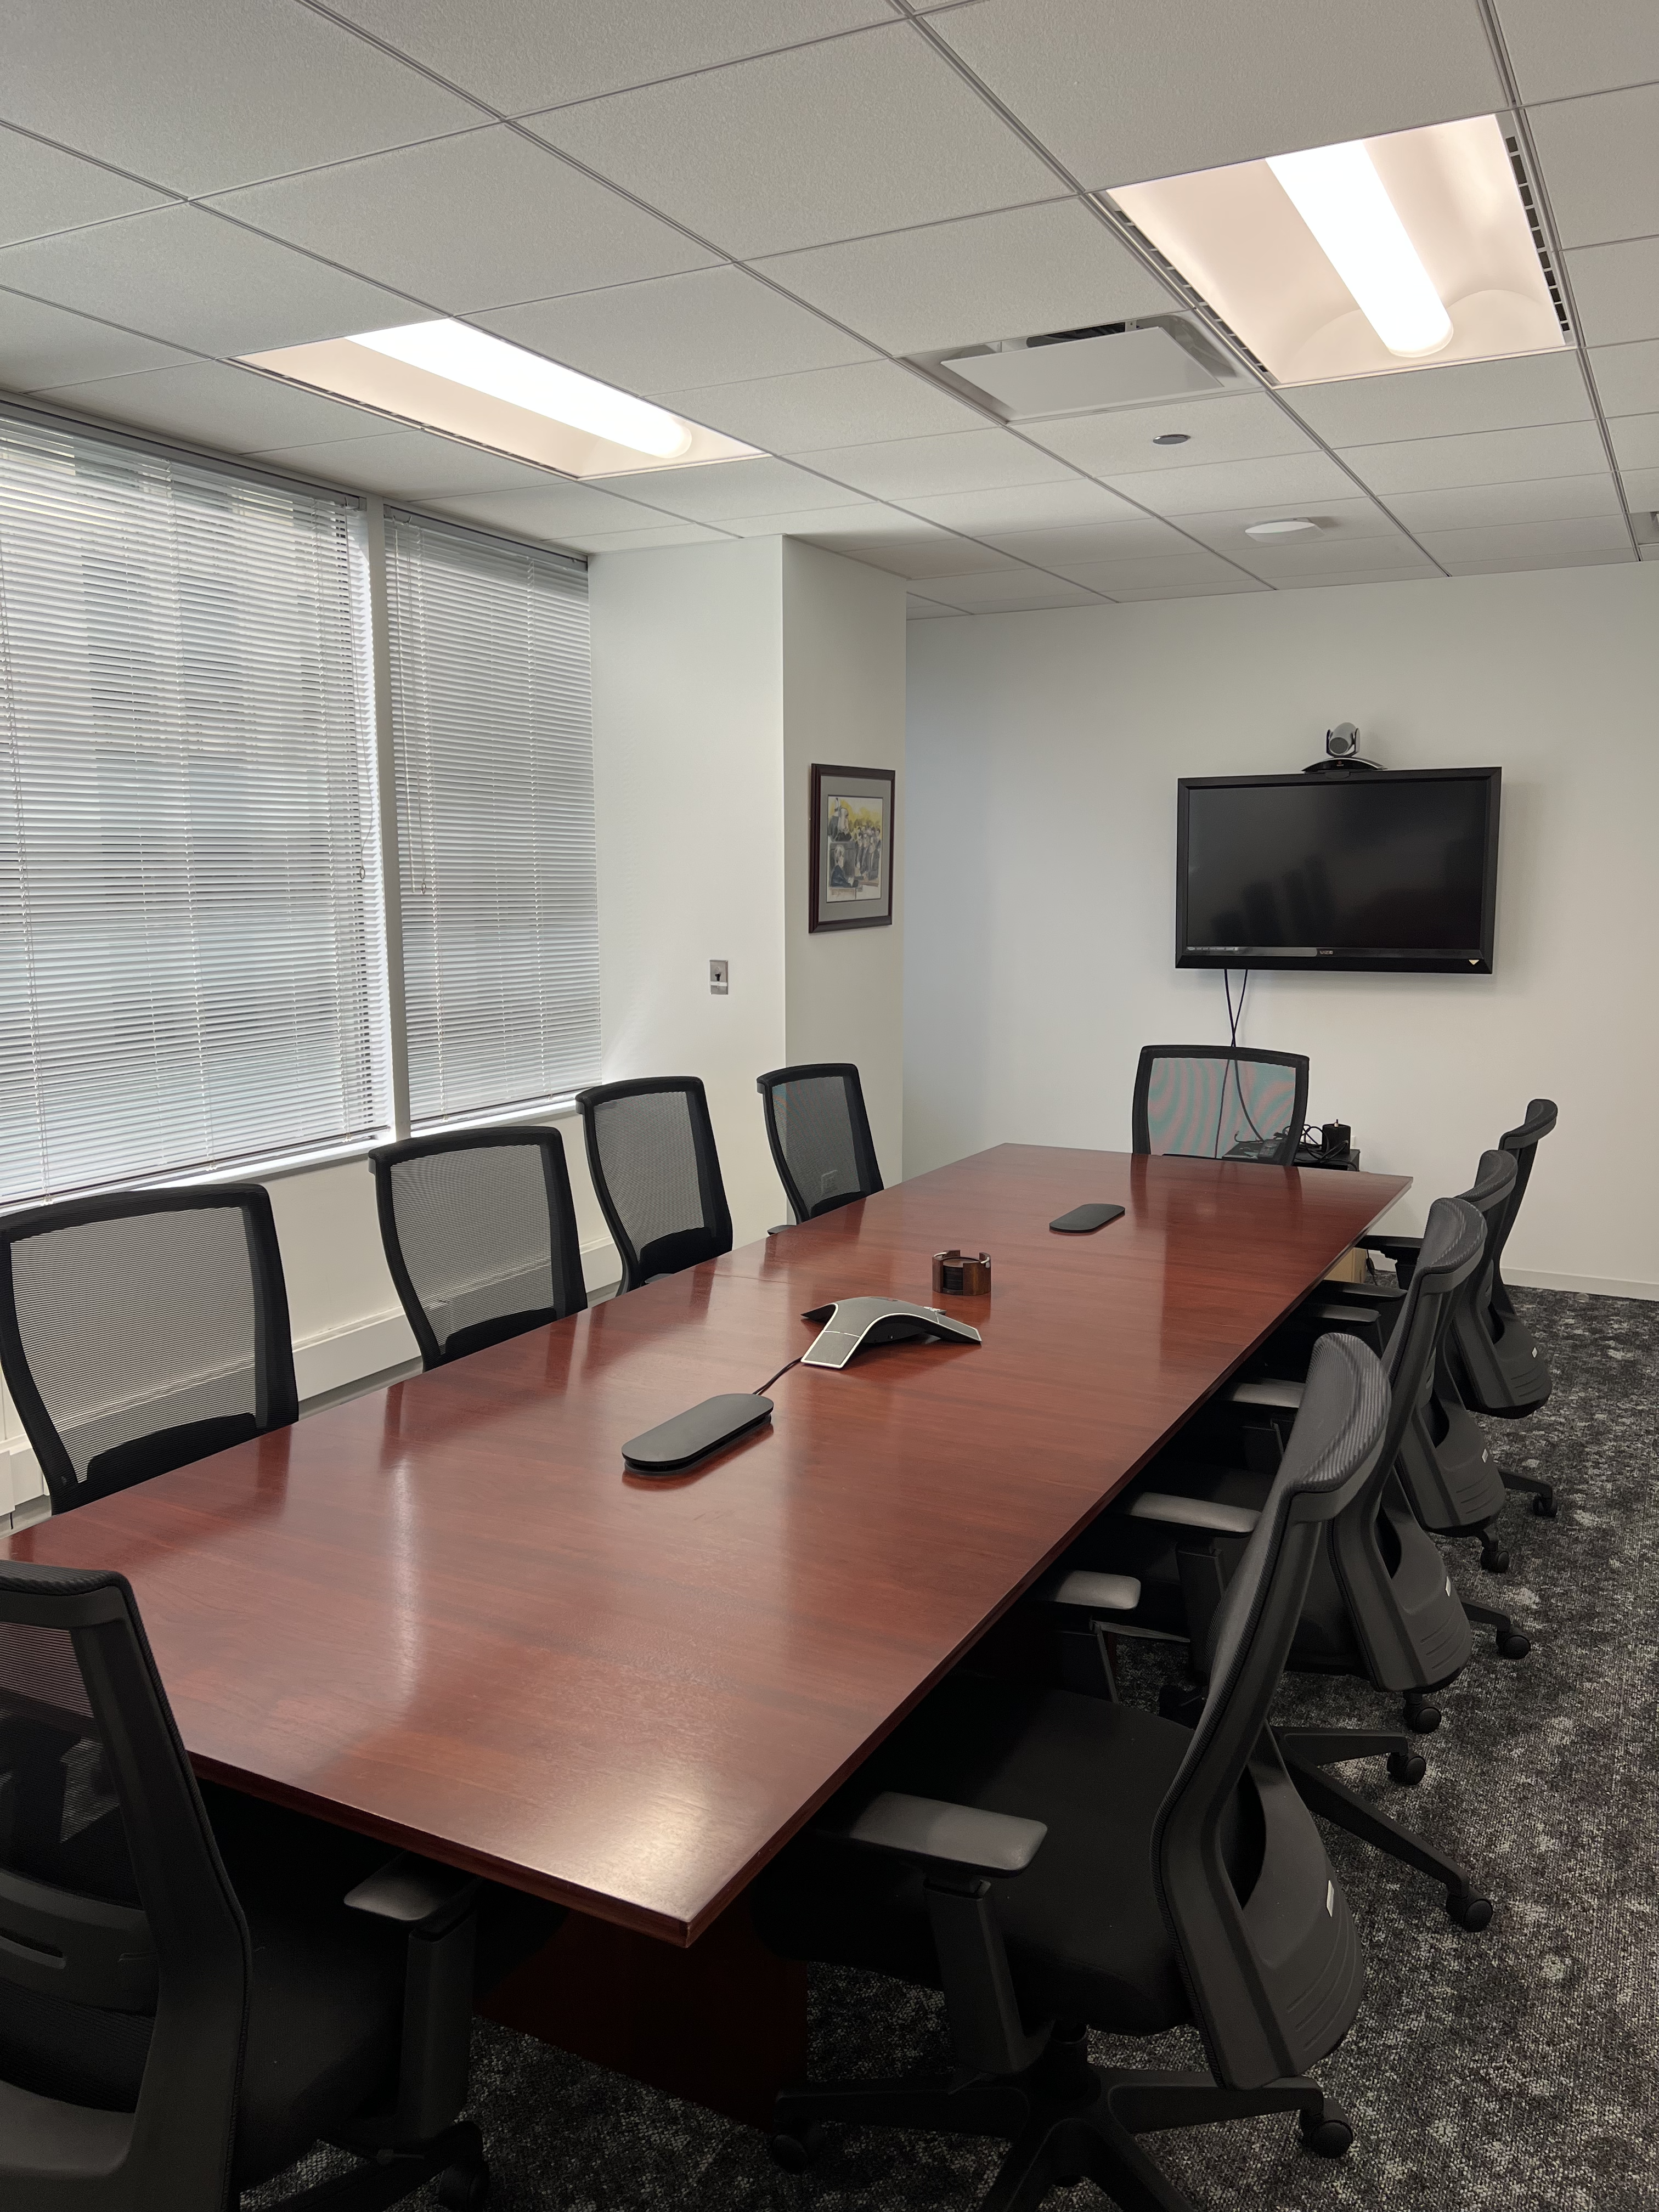 Waiting area provided by Urlaub Bowen & Associates available in our Chicago meeting venue.